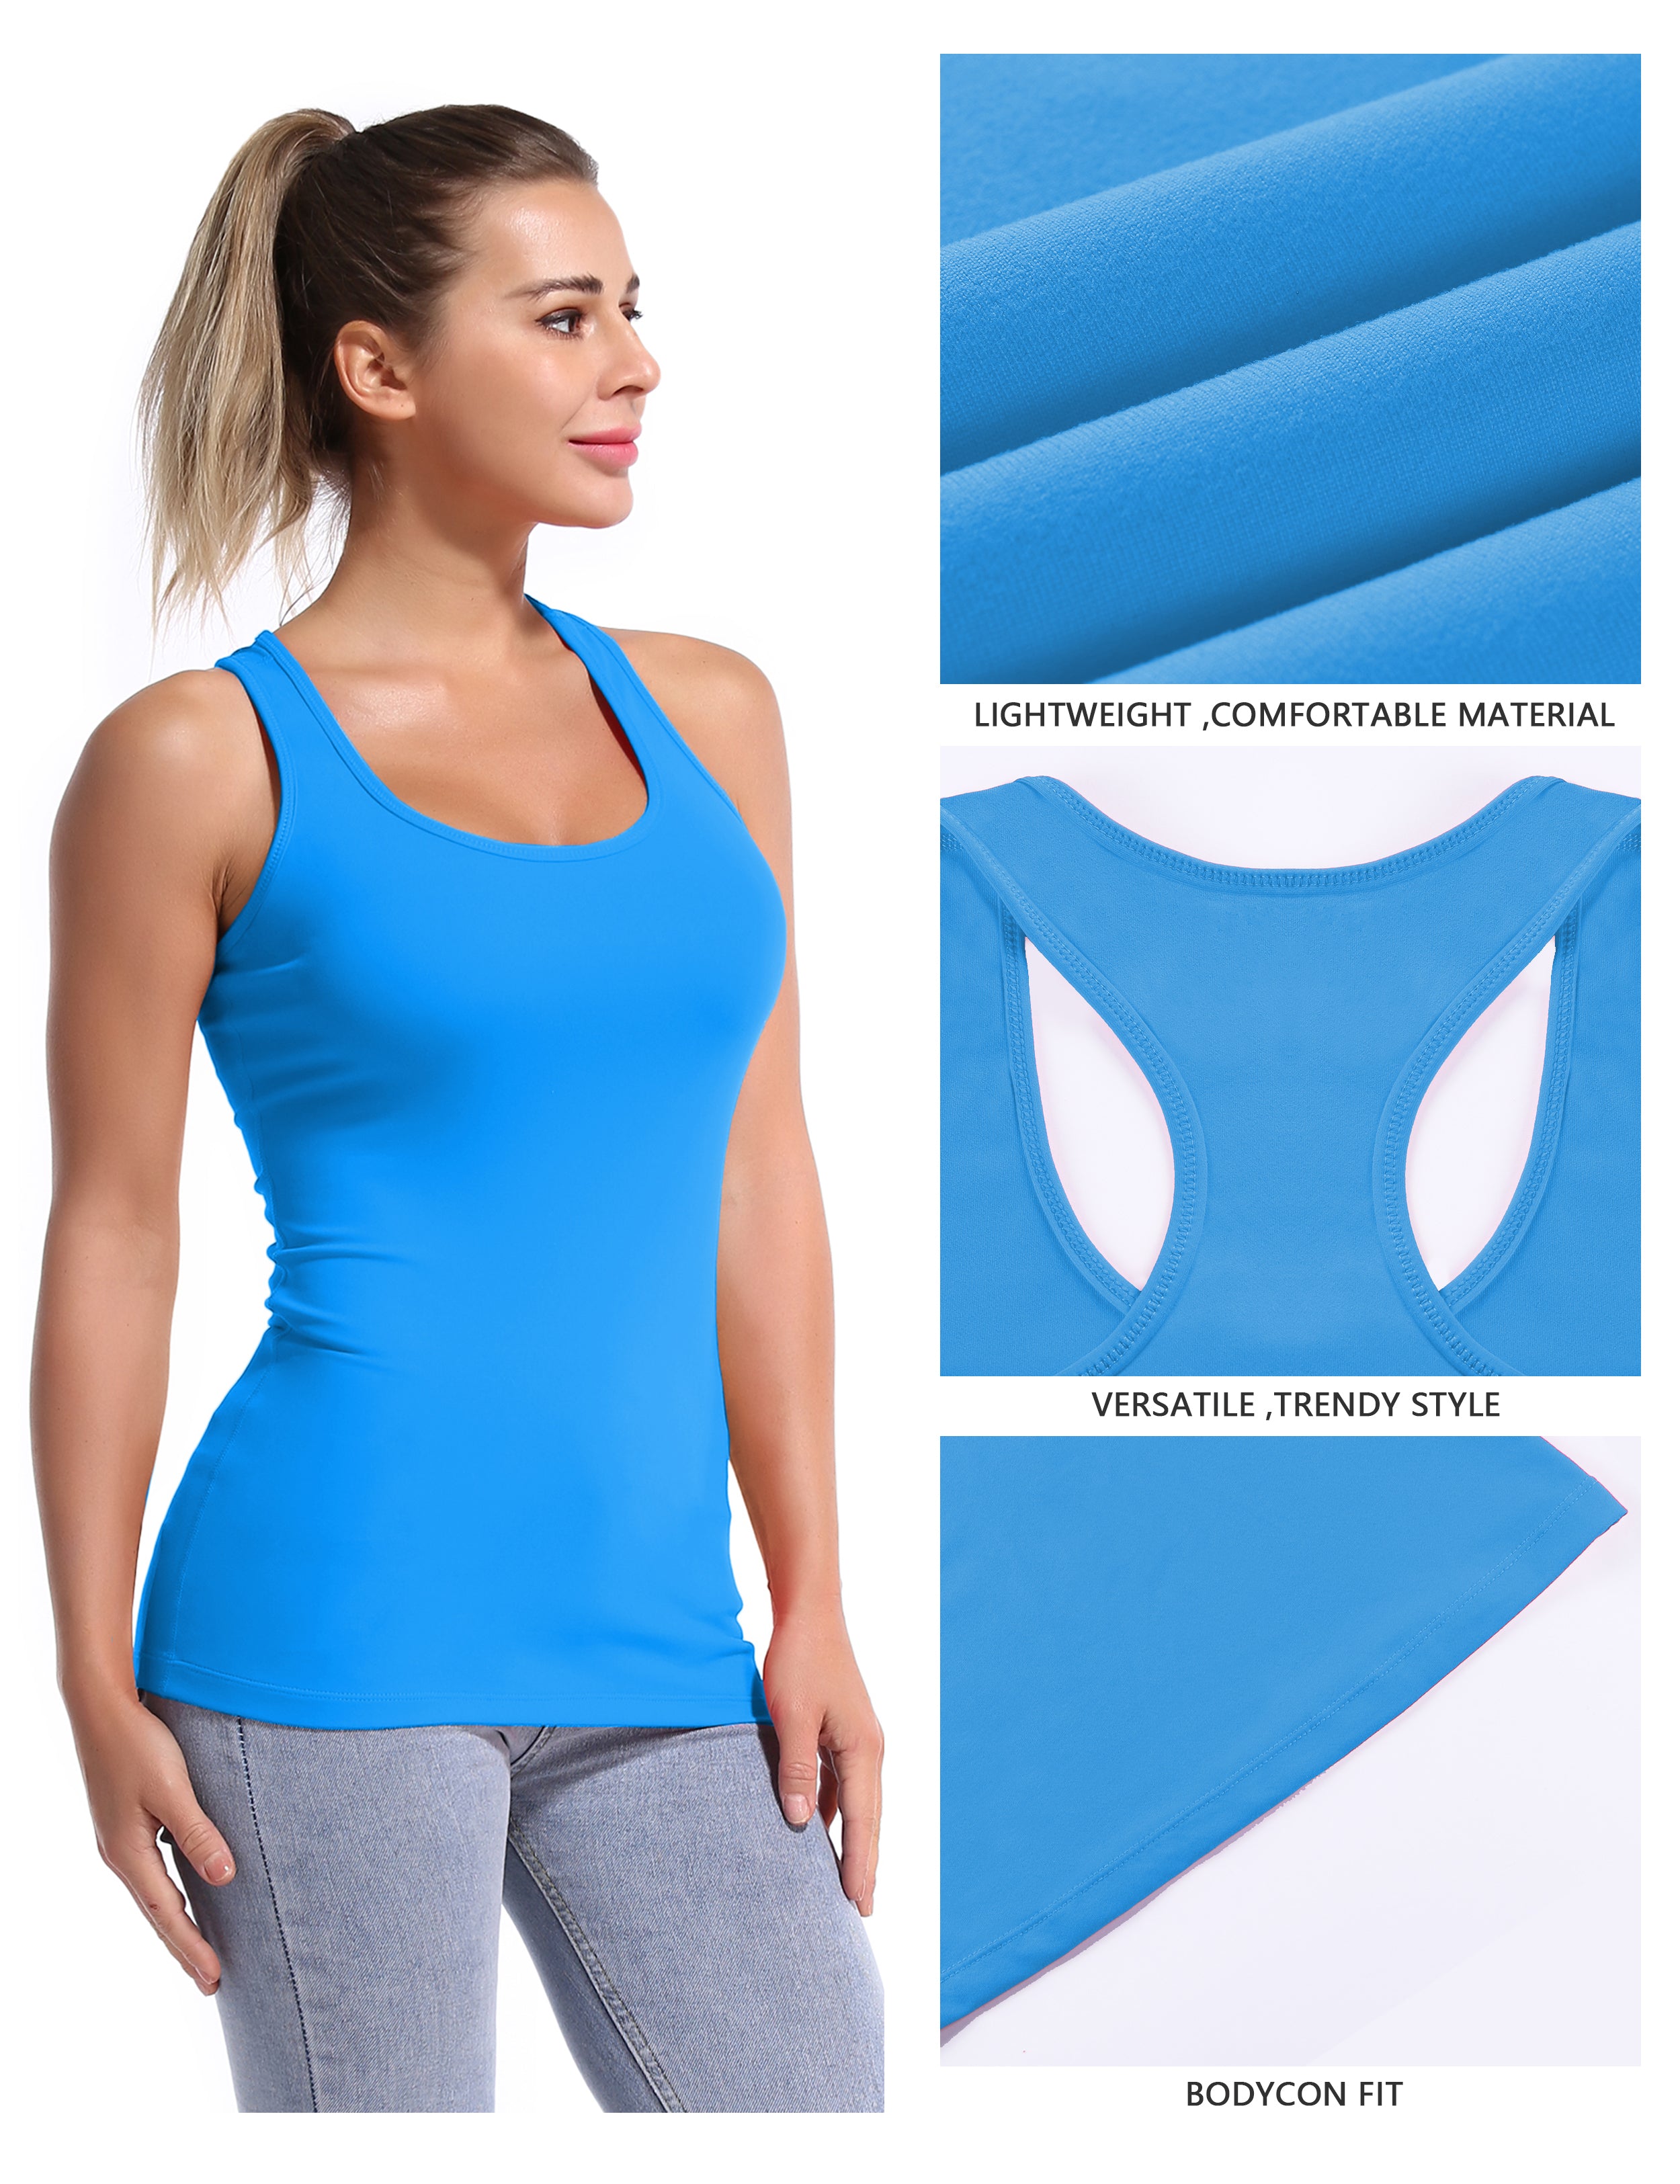 Racerback Athletic Tank Tops electricblue 92%Nylon/8%Spandex(Cotton Soft) Designed for Yoga Tight Fit So buttery soft, it feels weightless Sweat-wicking Four-way stretch Breathable Contours your body Sits below the waistband for moderate, everyday coverage